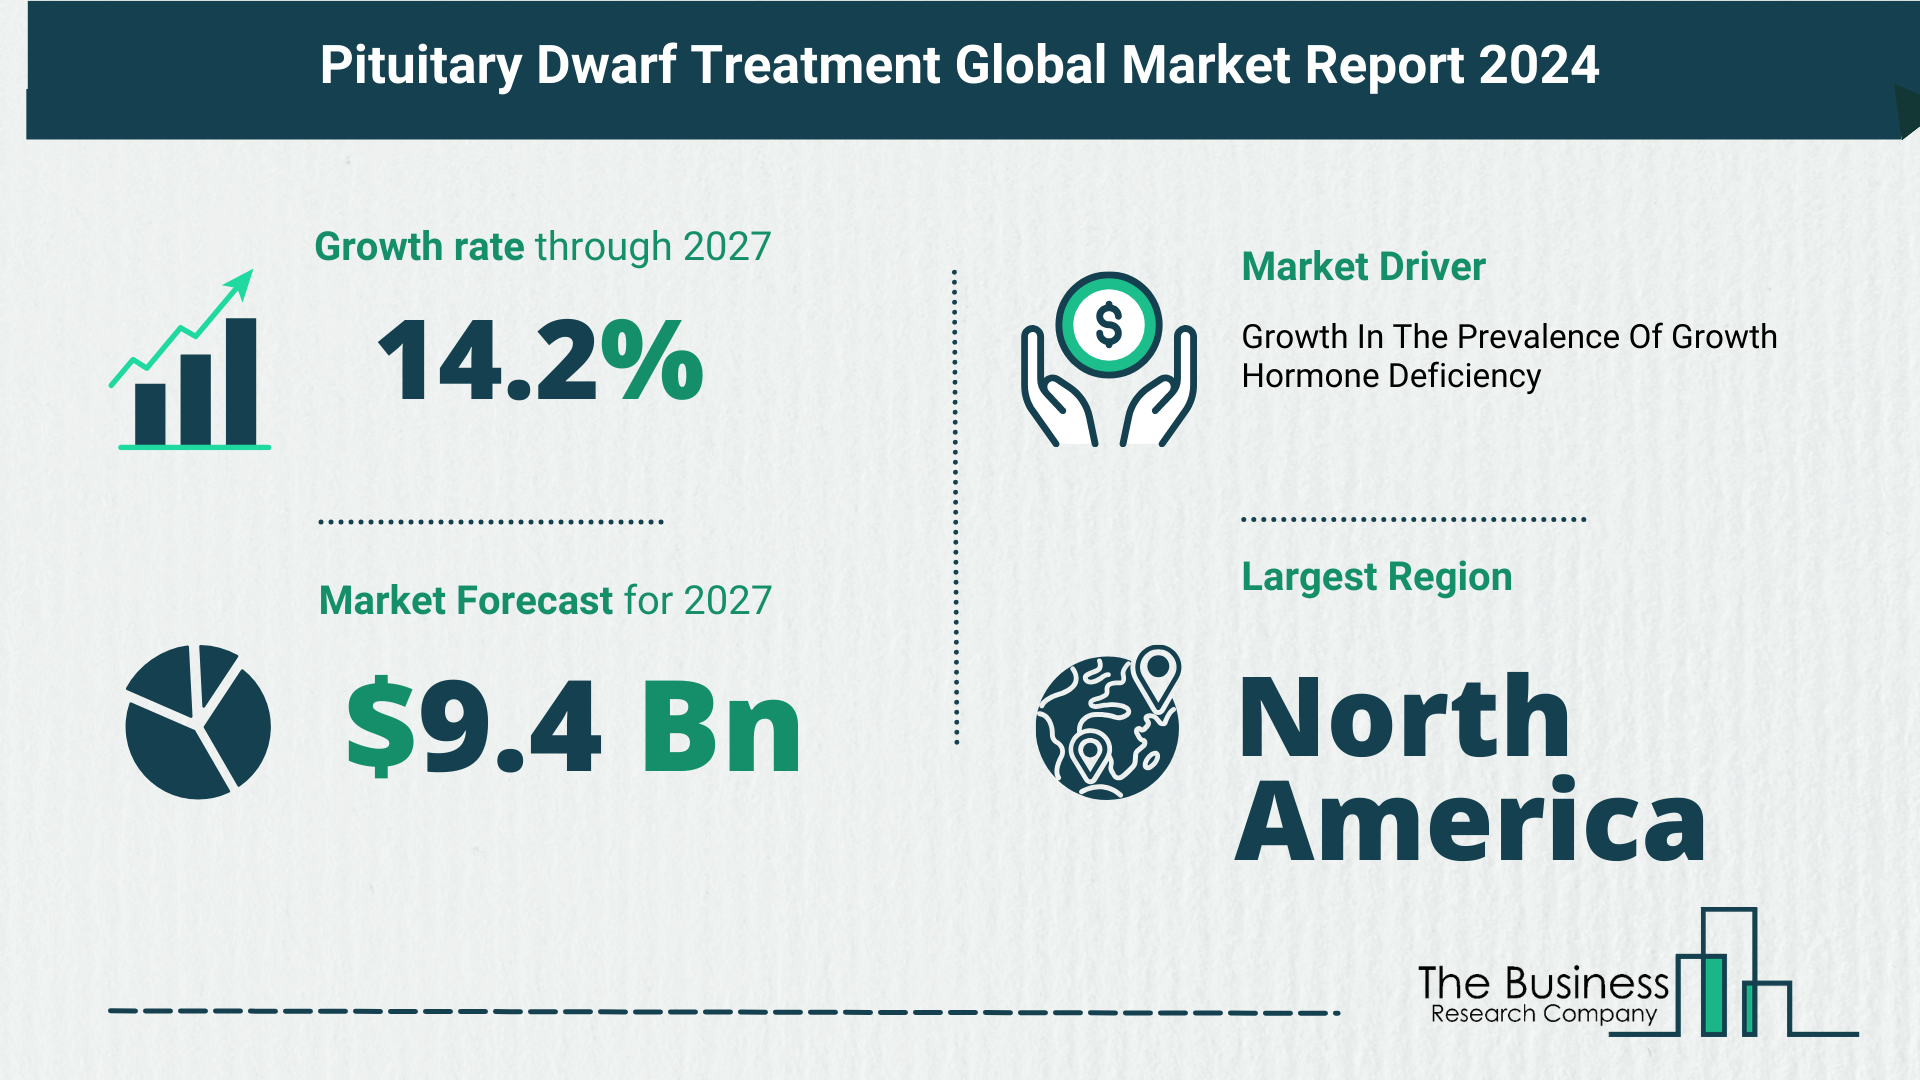 Global Pituitary Dwarf Treatment Market Report 2024 – Top Market Trends And Opportunities